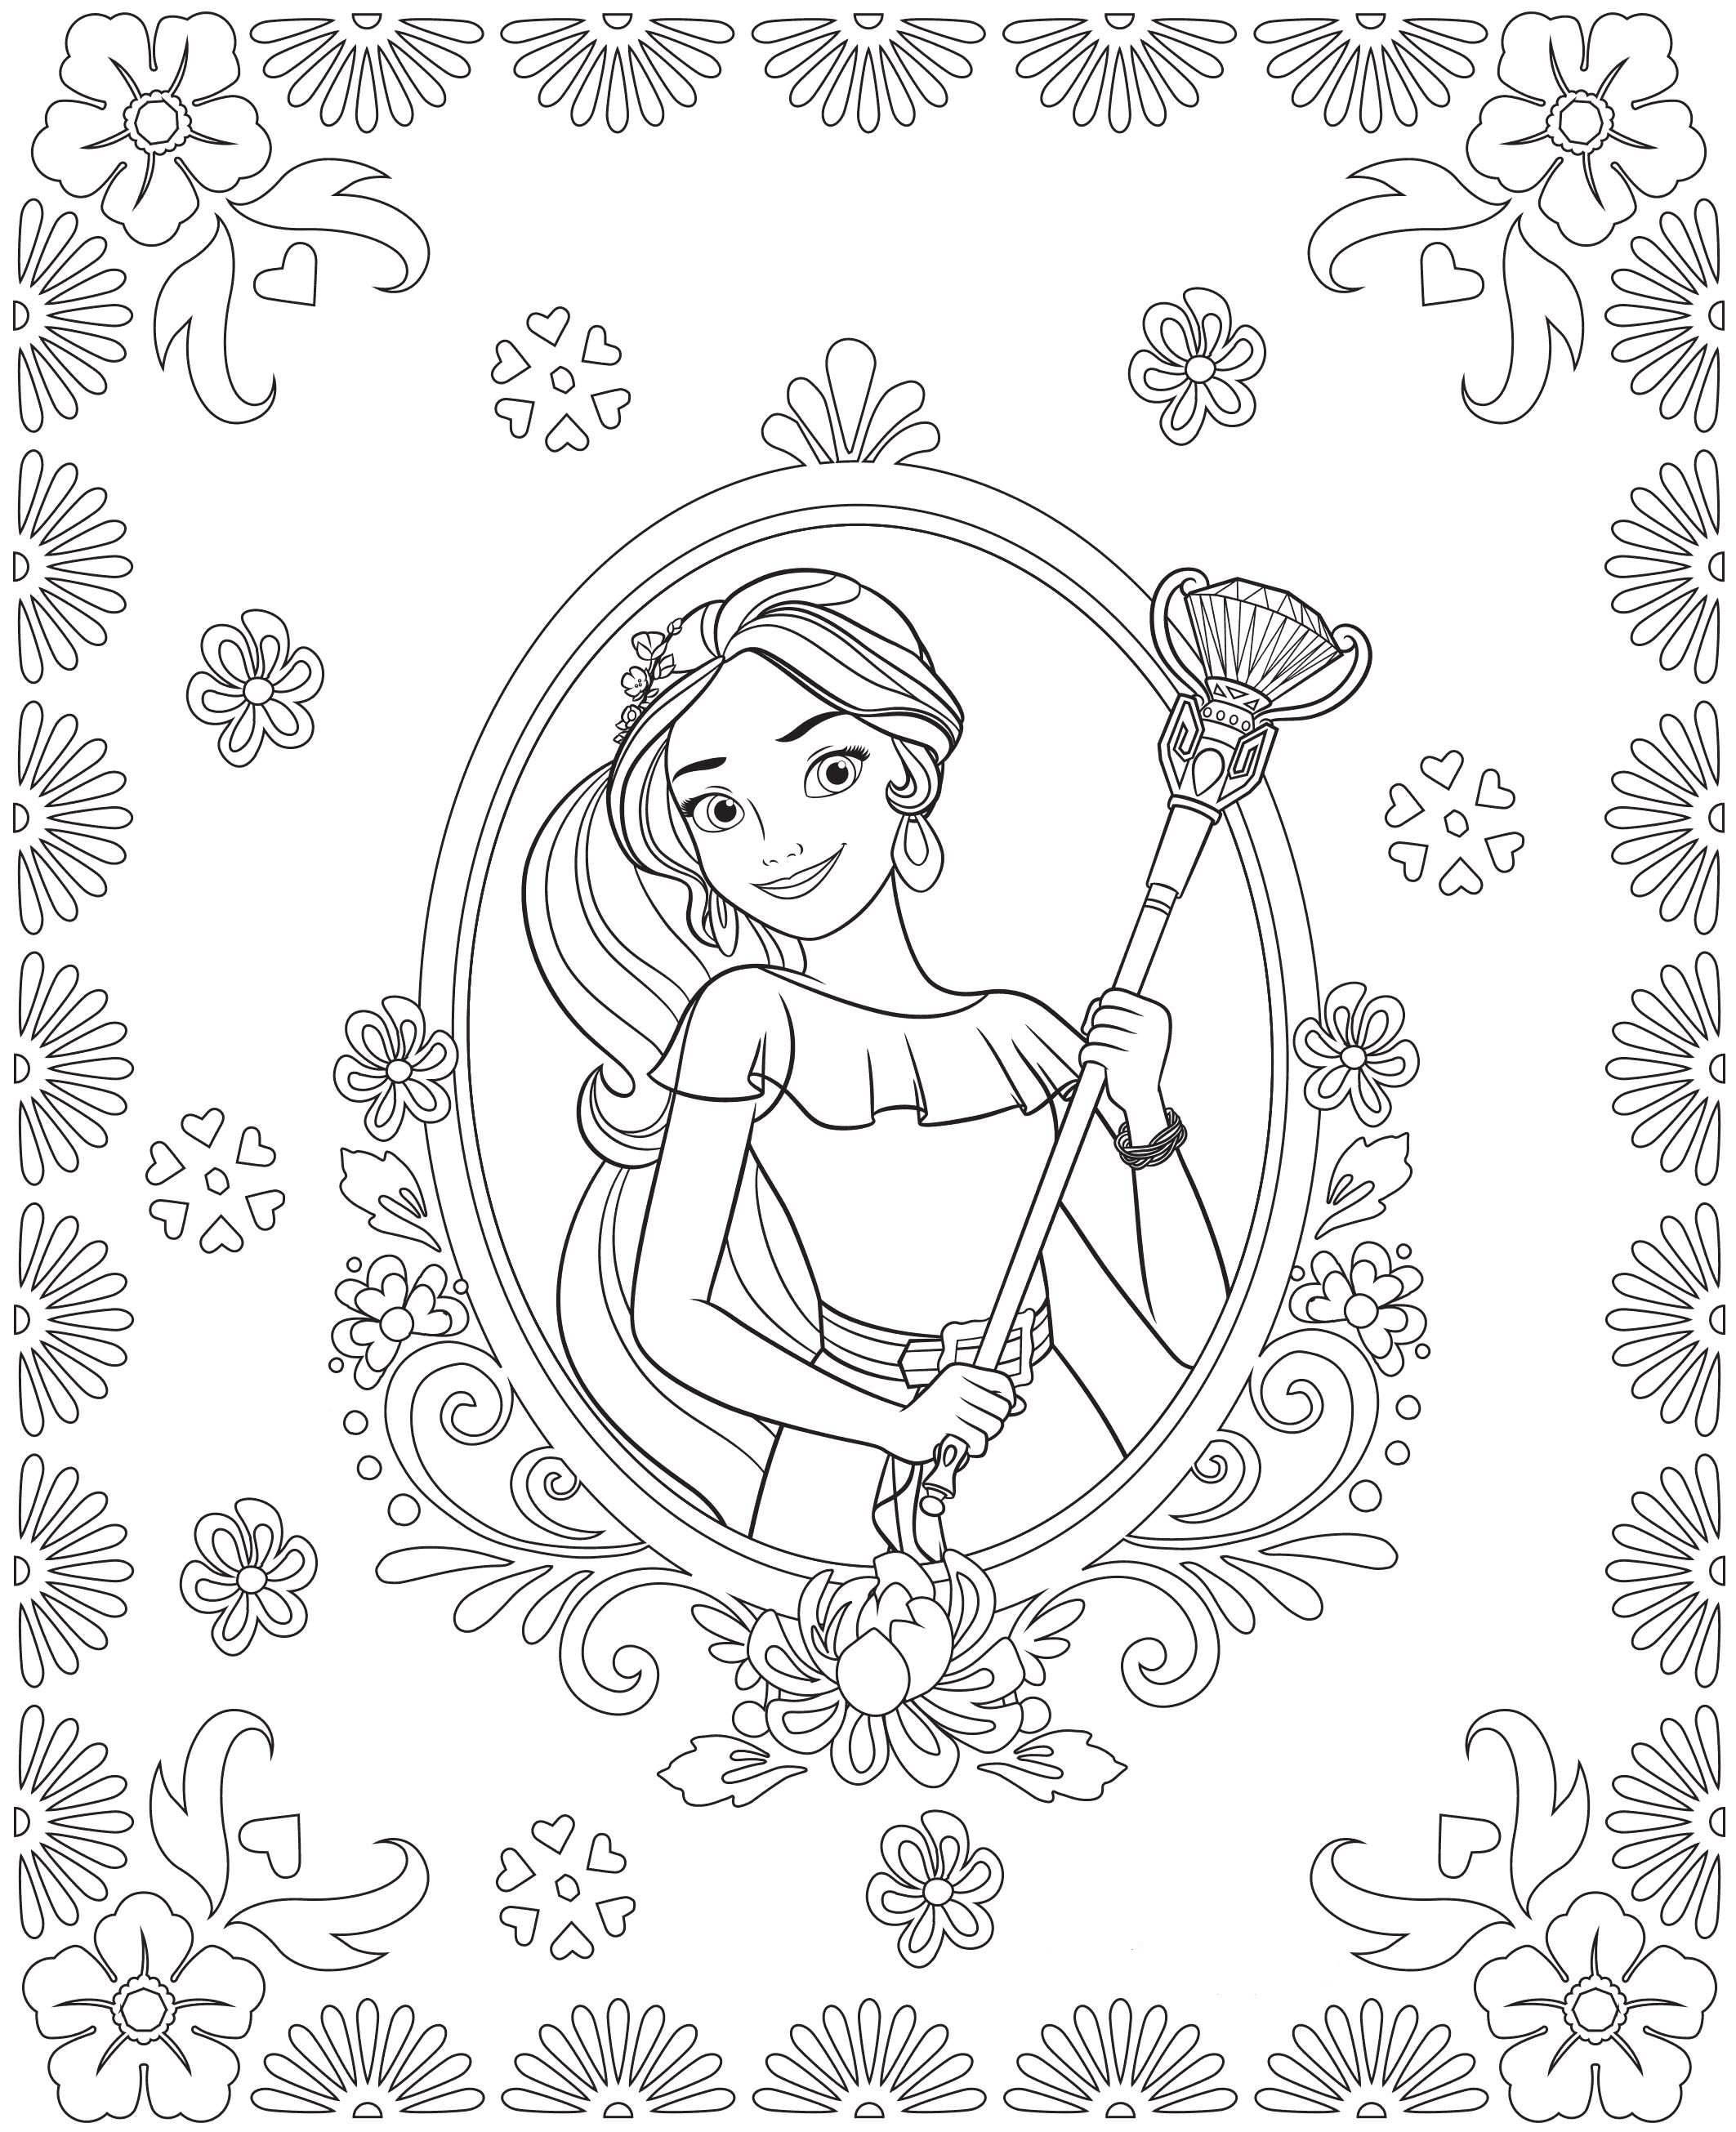 Elena of Avalor Coloring Pages - Best Coloring Pages For Kids